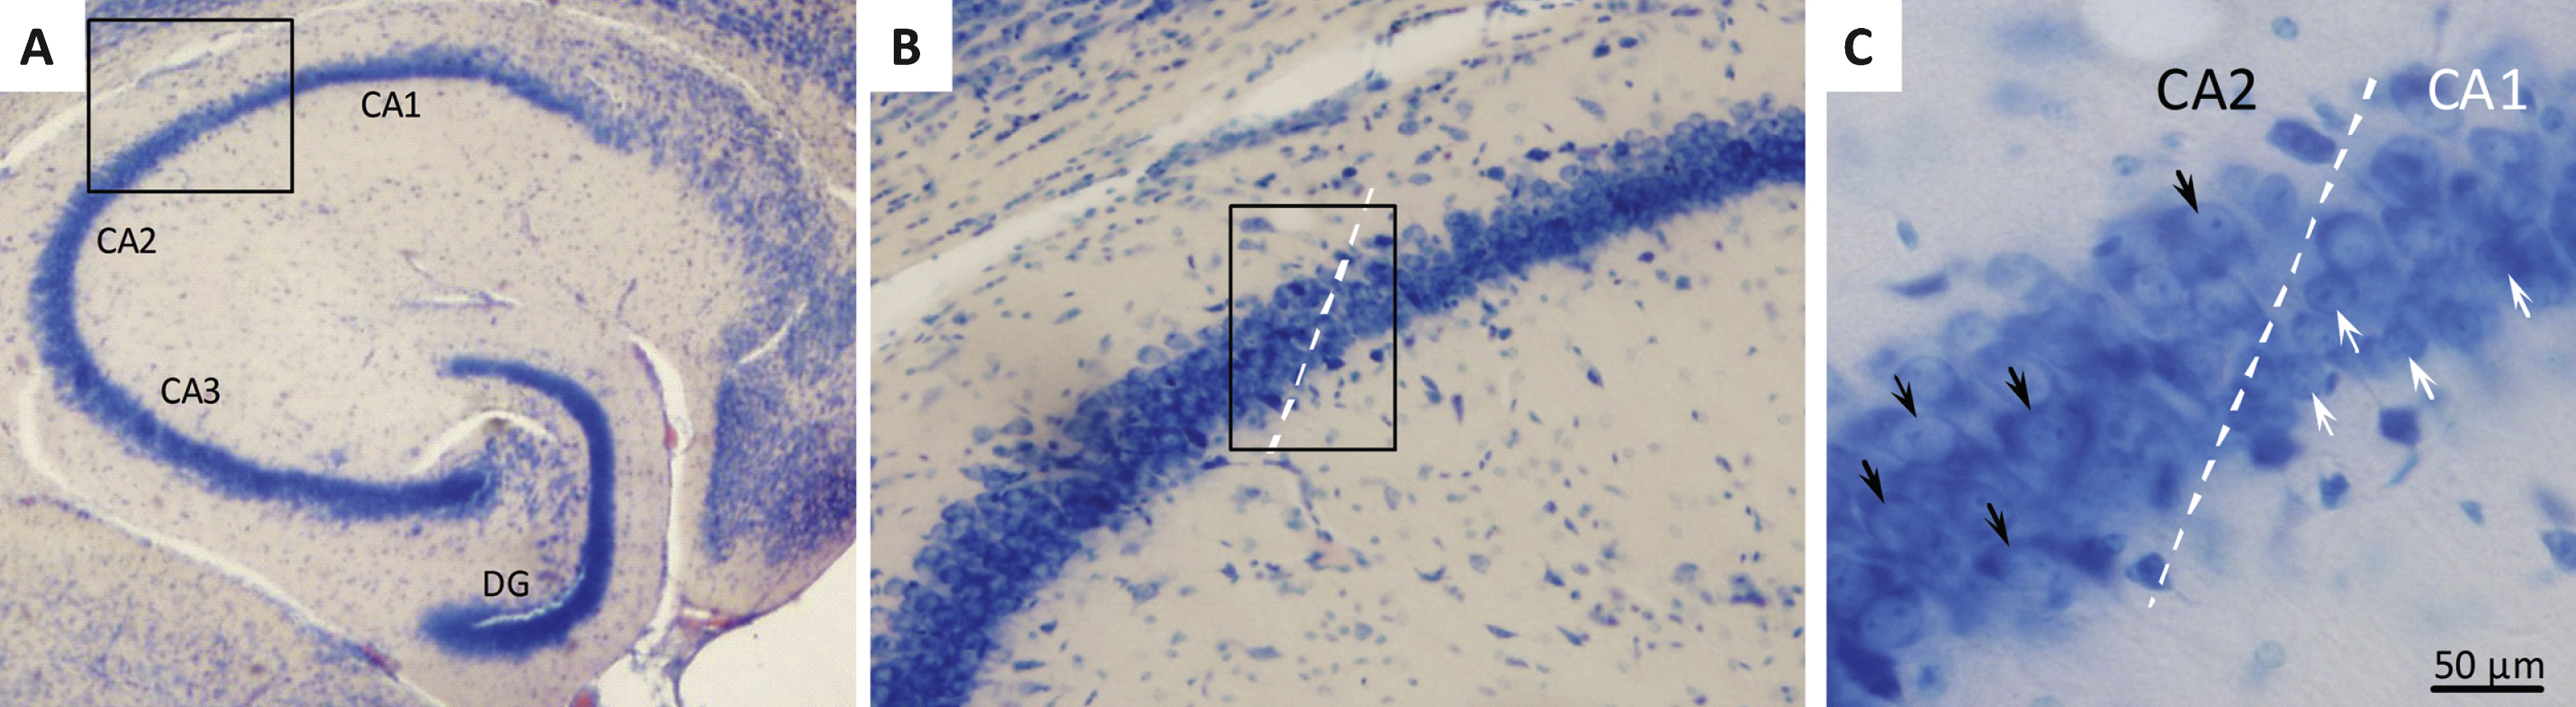 Histological assessment of hippocampal CA1 pyramidal neuron numbers. Brains were sampled in the horizontal plane using systematic uniform random sampling to ensure representation of the entire hippocampus. The major subfields of the mouse hippocampus are indicated in panel A (2x magnification). Panel B shows the border between CA1 and CA2. The CA1 region (Giemsa stained) was delineated on average in 8 sections per animal using a 10x objective based on cell morphology (B). CA1 pyramidal neurons are smaller and more densely organized than CA2 neurons (C; white arrows = CA1 pyramidal neuron, black arrows = CA2 pyramidal neuron; 40x magnification).